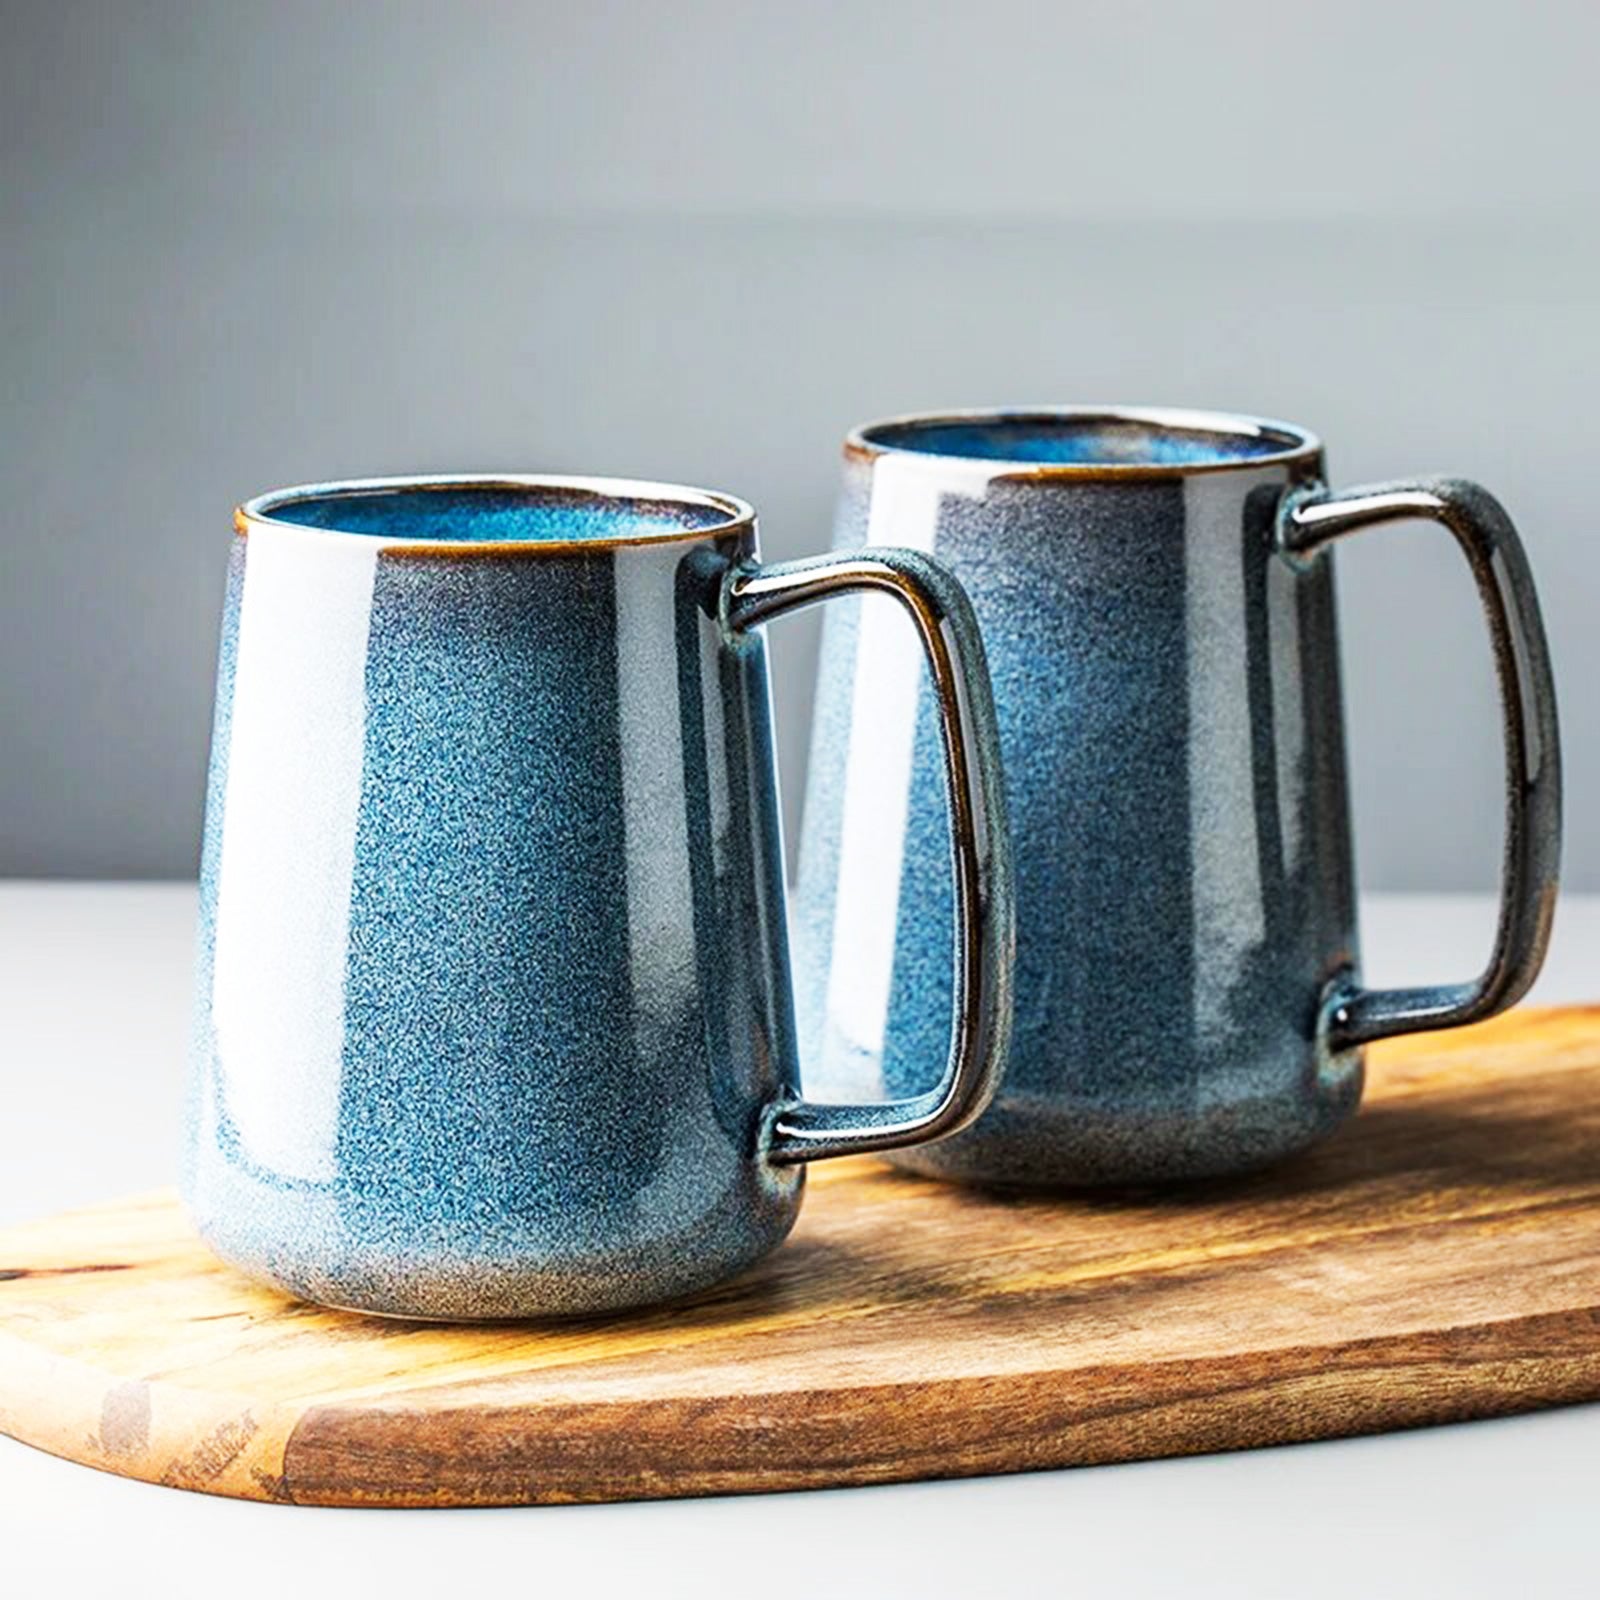 Super-sized Mugs with Handy Four-Finger Grip